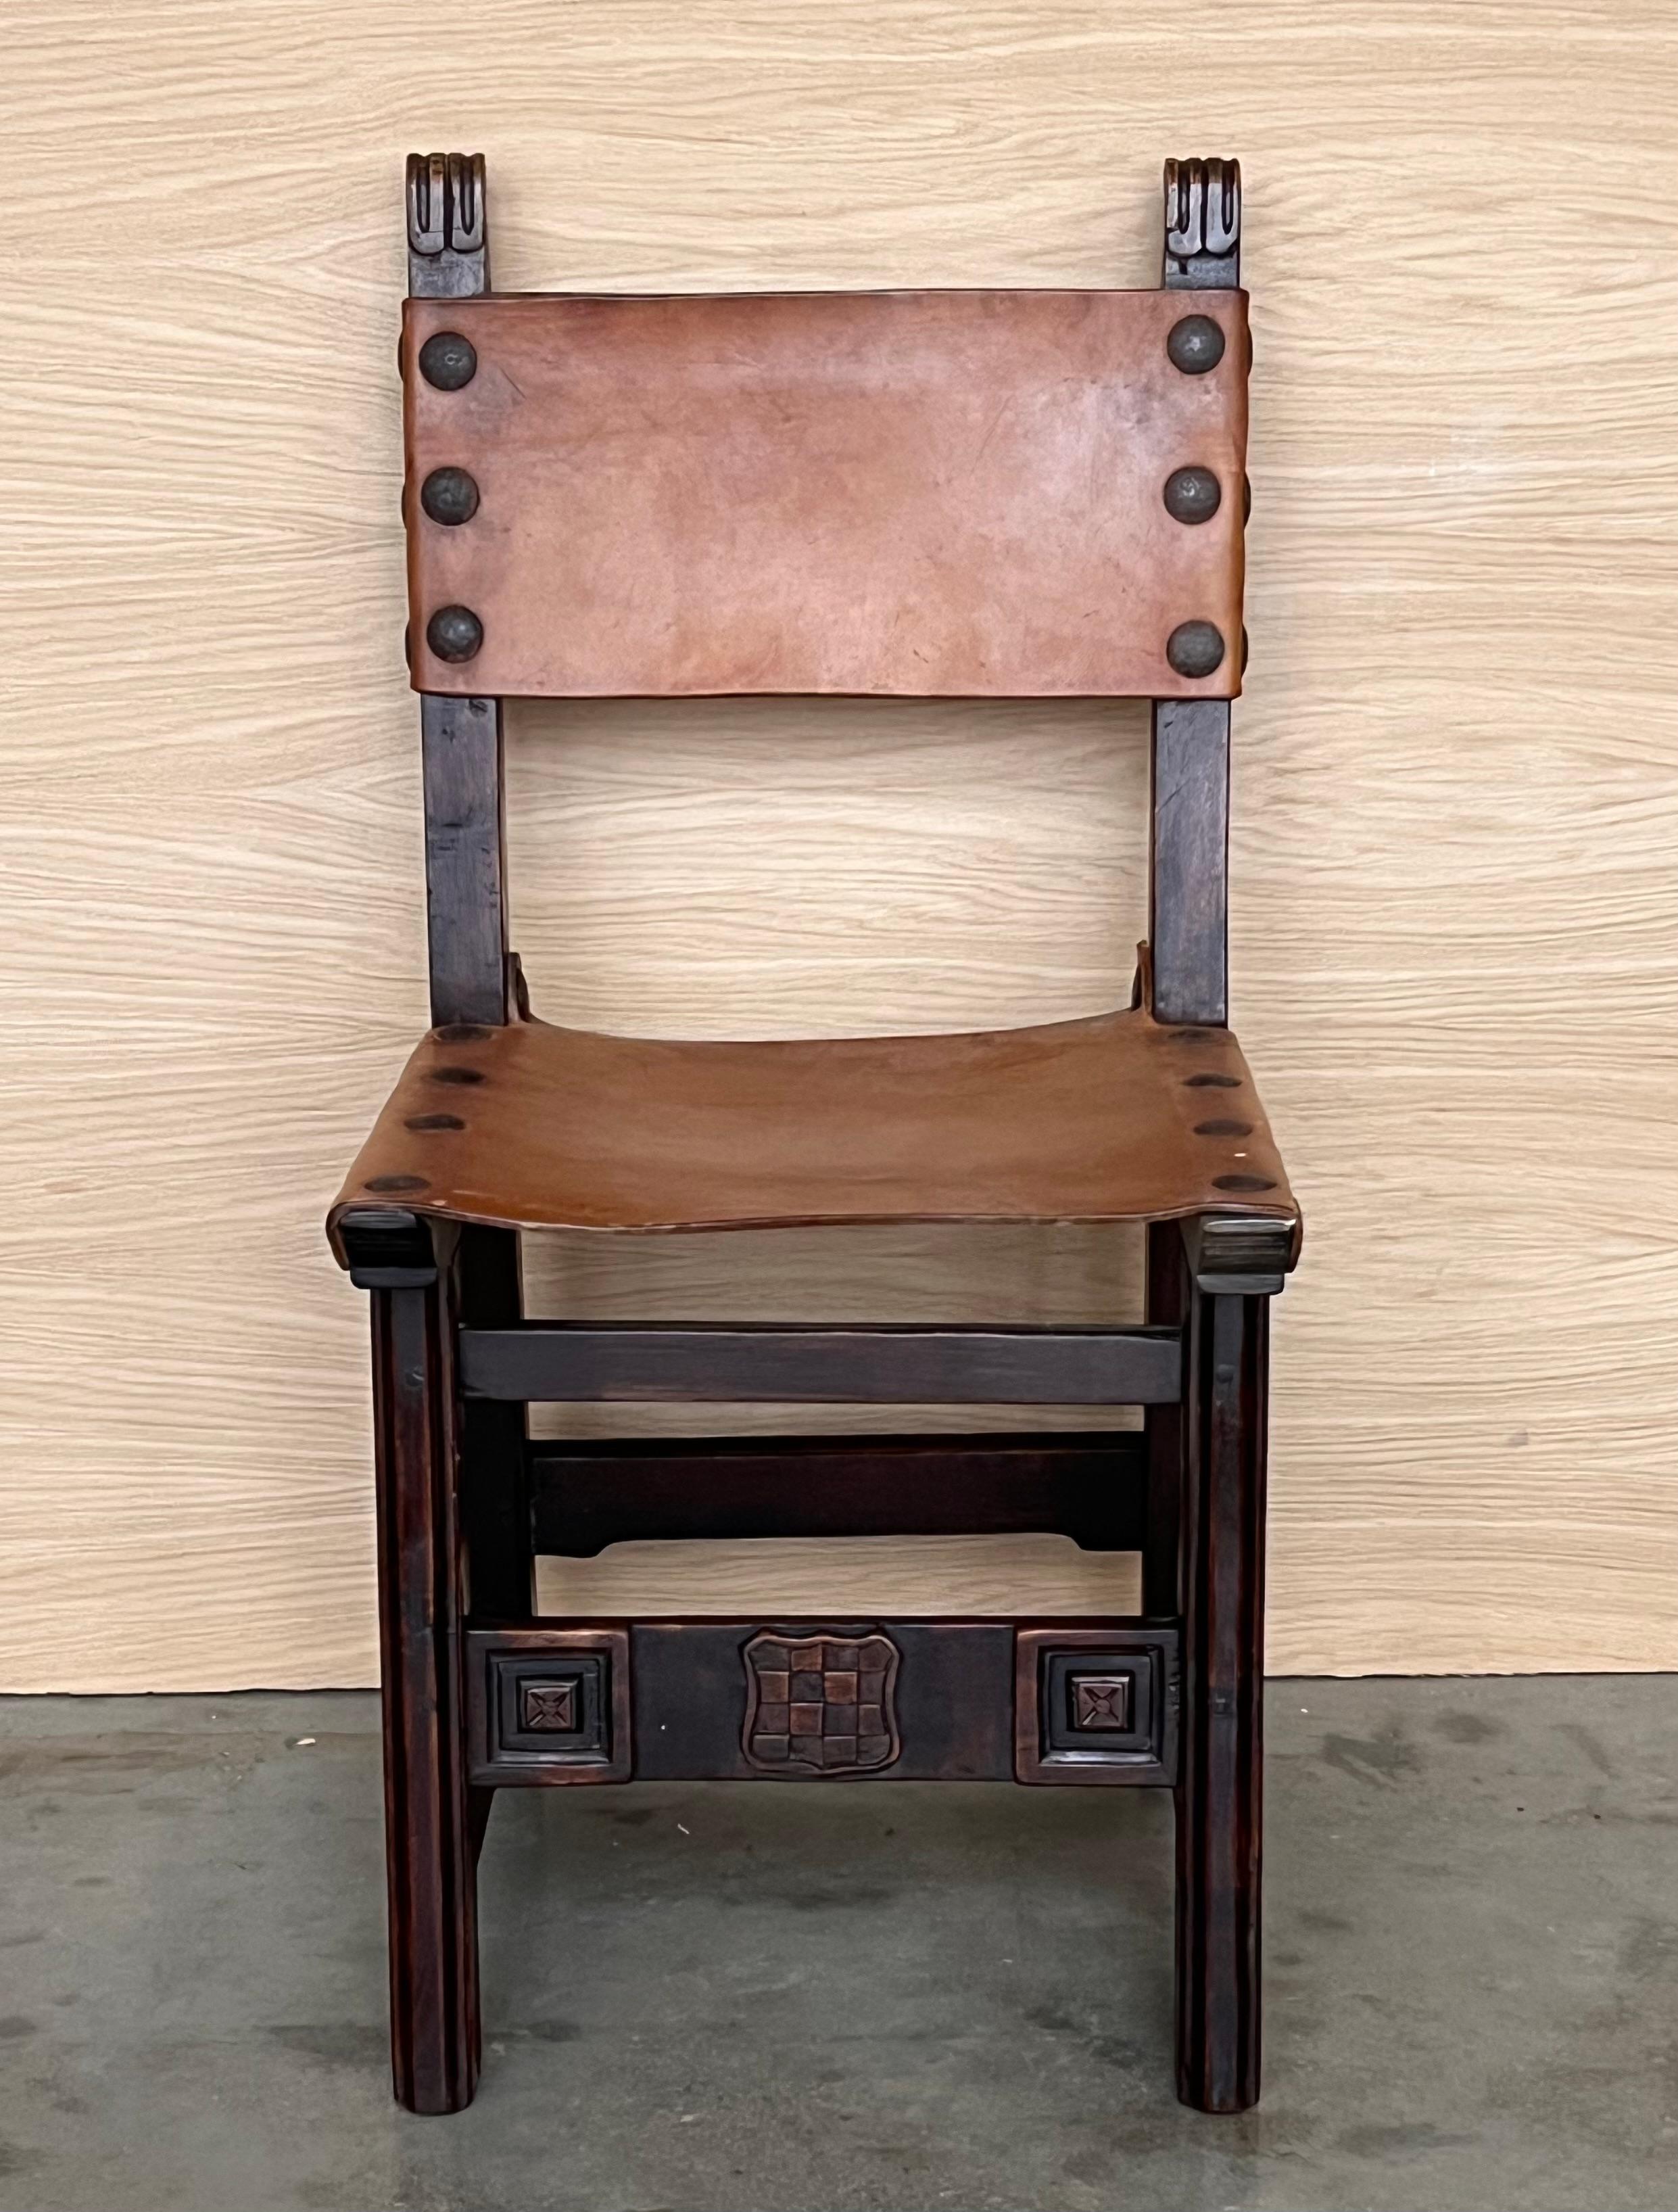 A set of 6 Spanish chairs with leather sling seatsand backs on oak and sycamore frames with hand carved decoration. These chairs are true to the Spanish character and each features carvings that employ typical Spanish elements. The leather sling